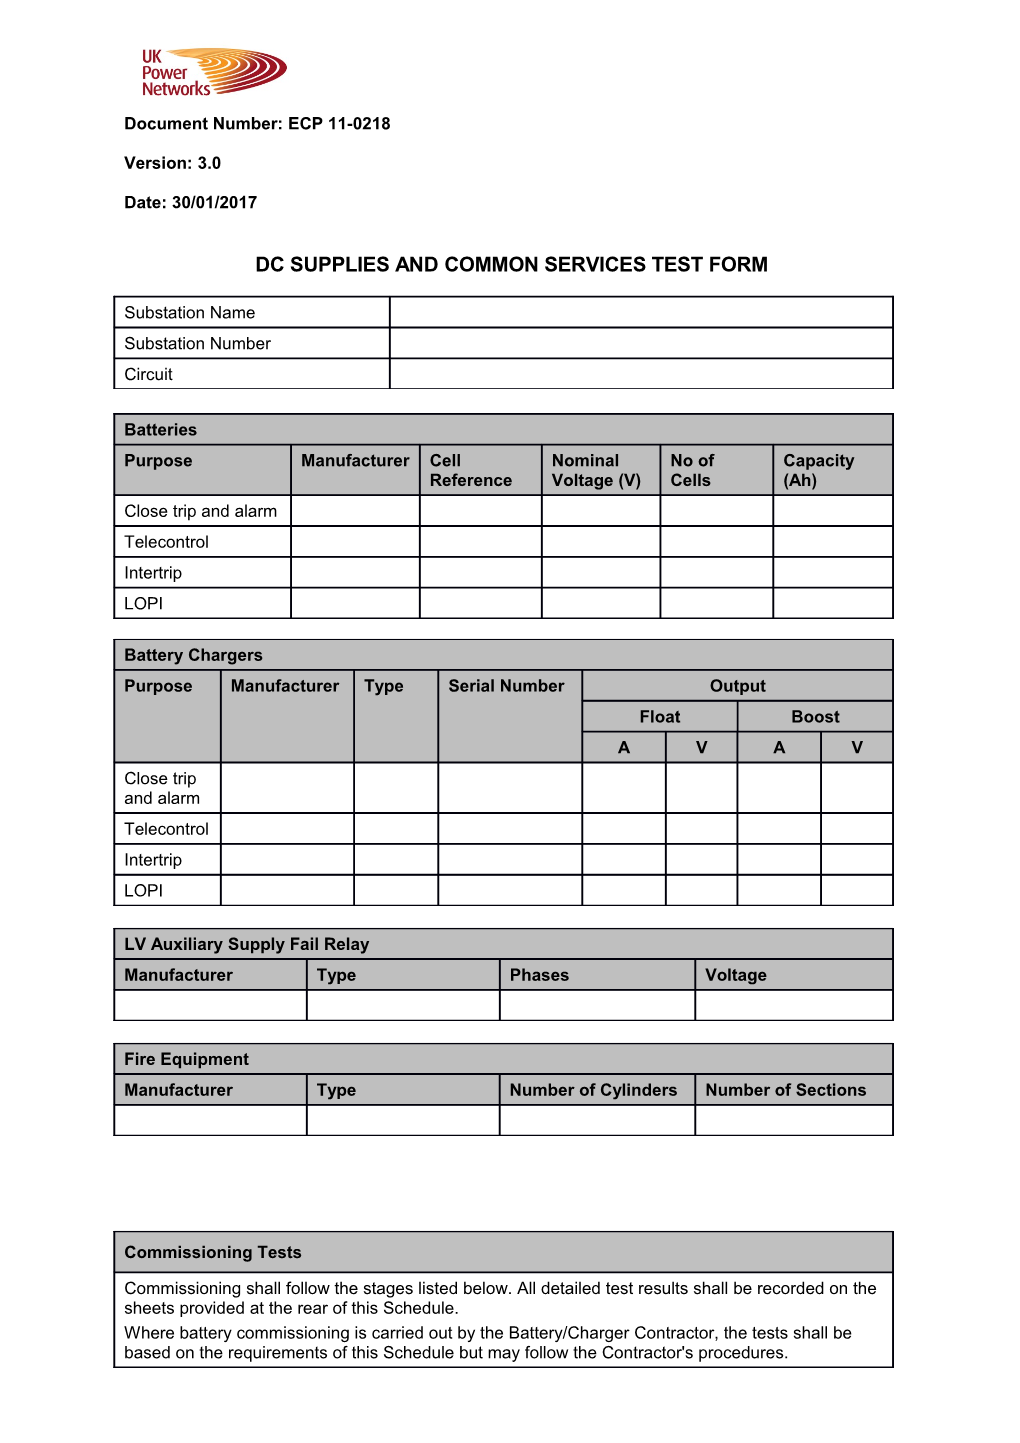 ECP 11-0218 DC Supplies and Common Services Test Form